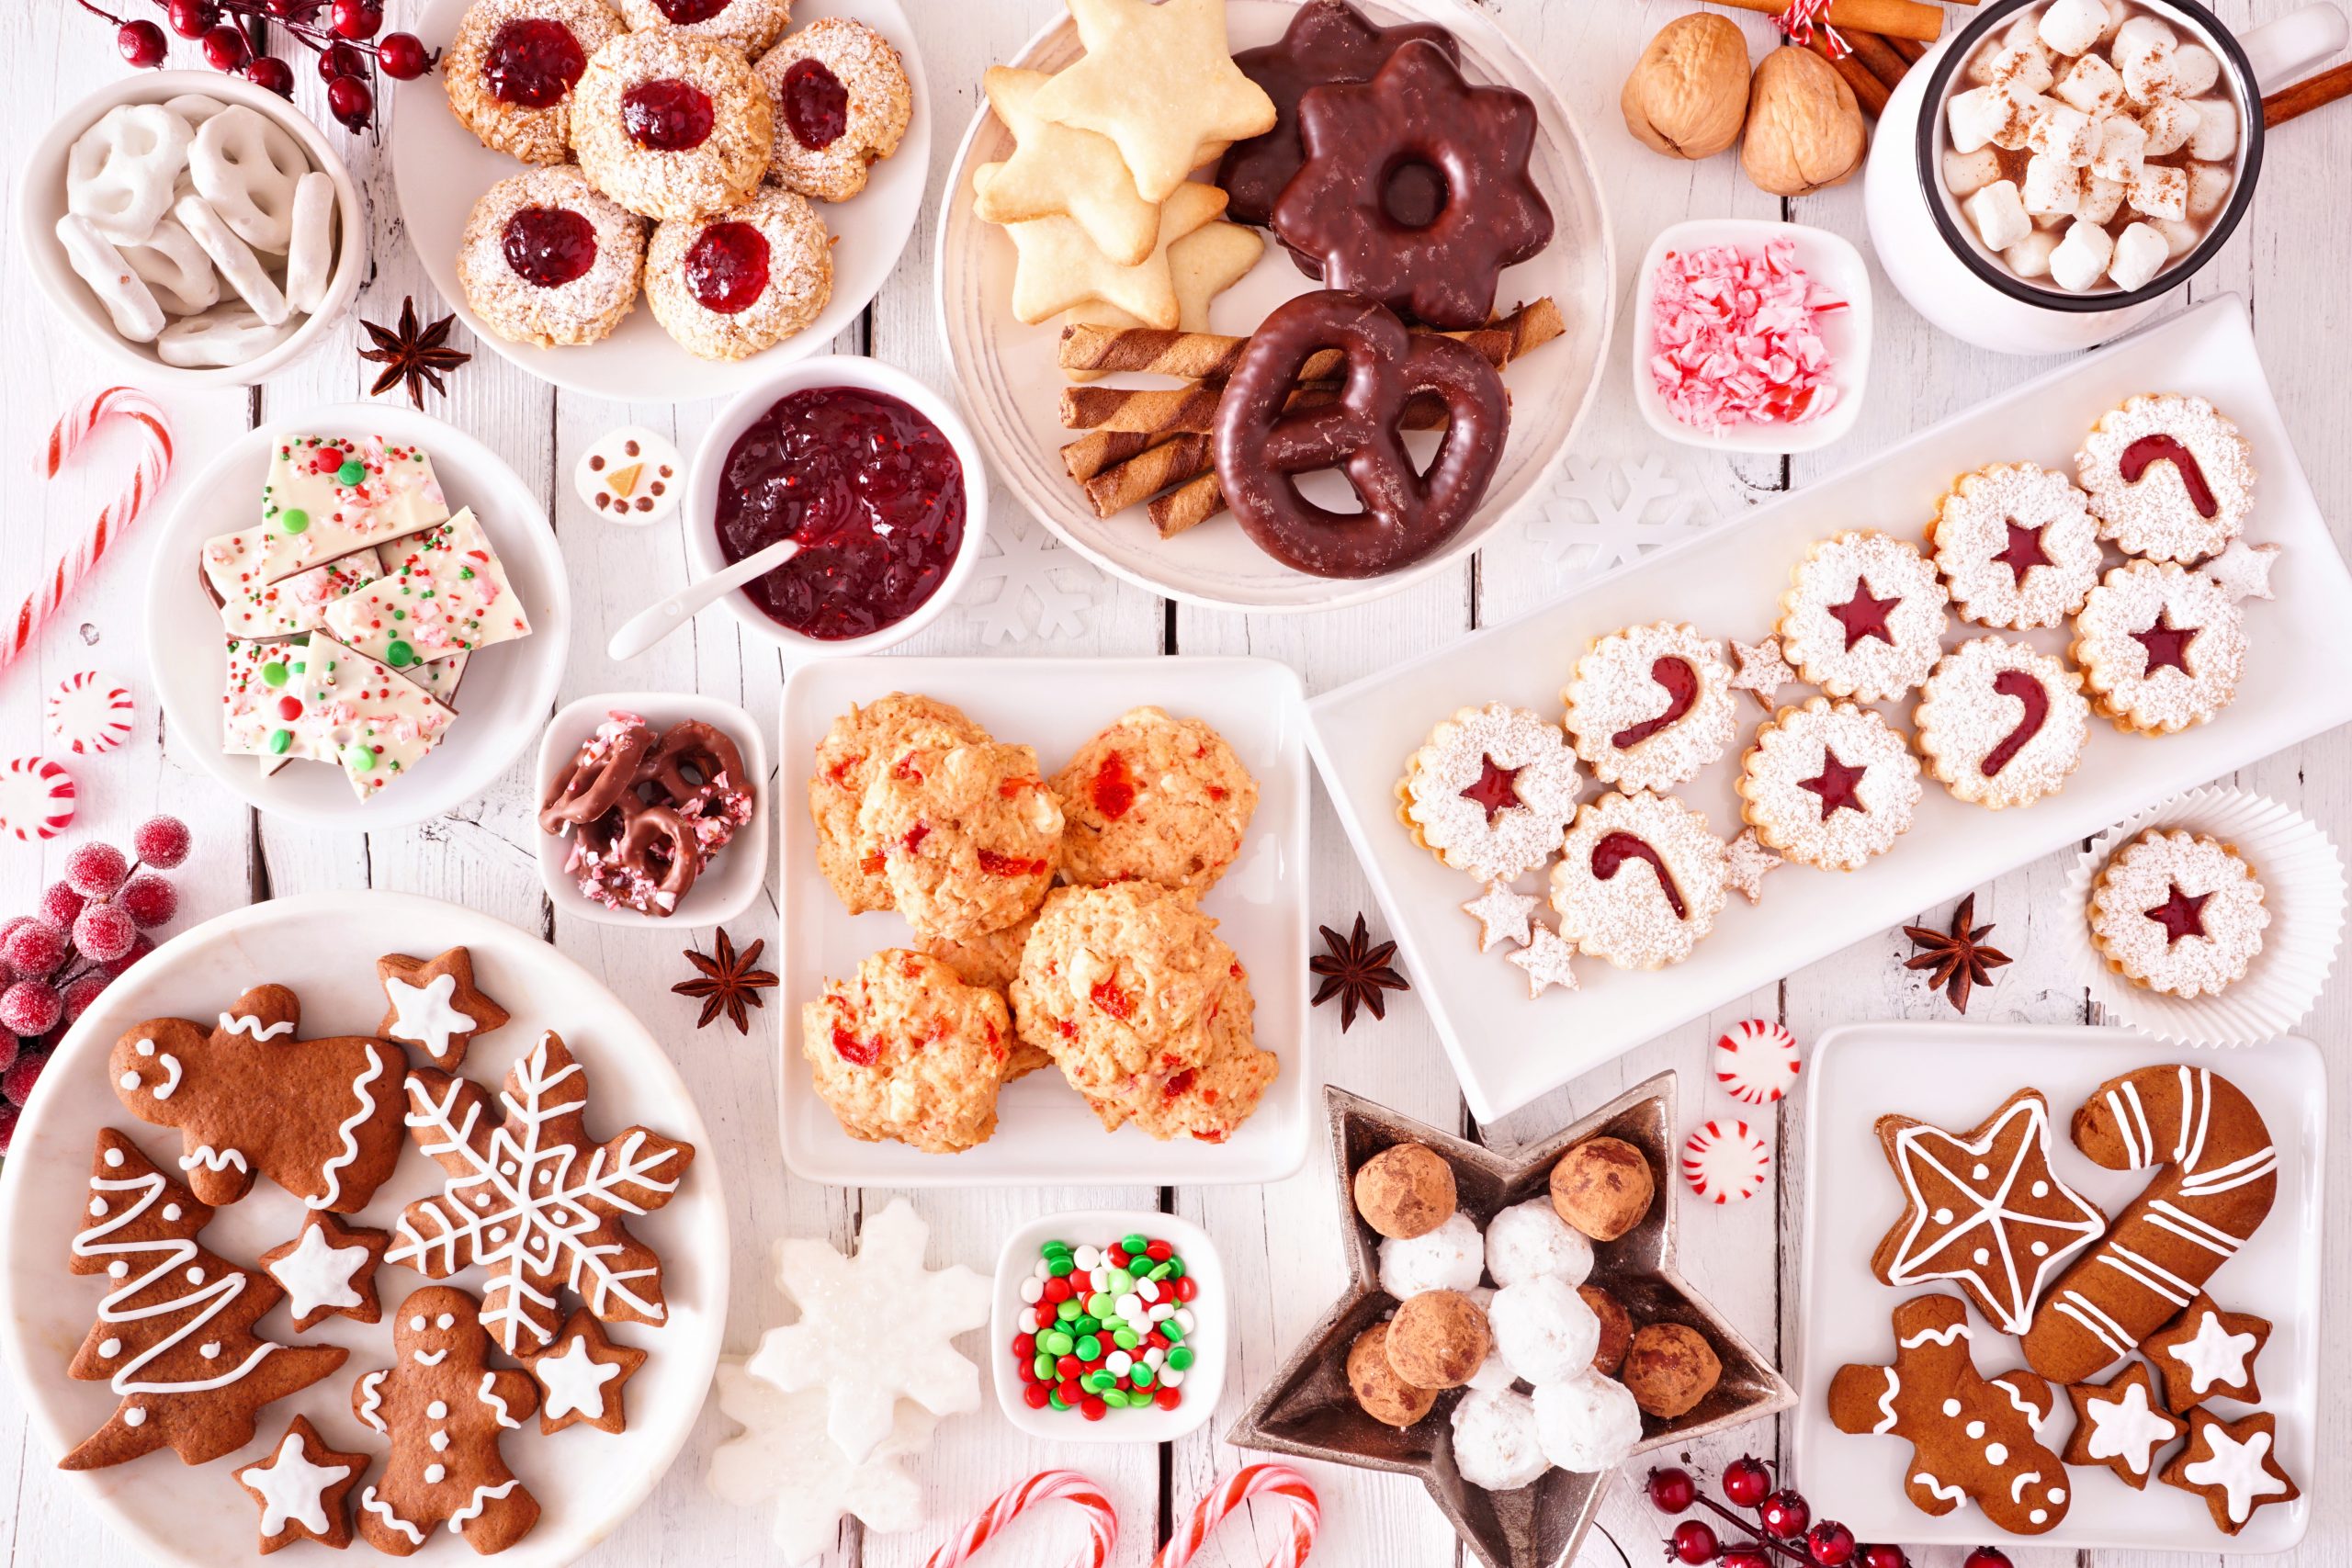 Christmas sweets and cookies. Top view table scene over a white wood background. Holiday baking concept.